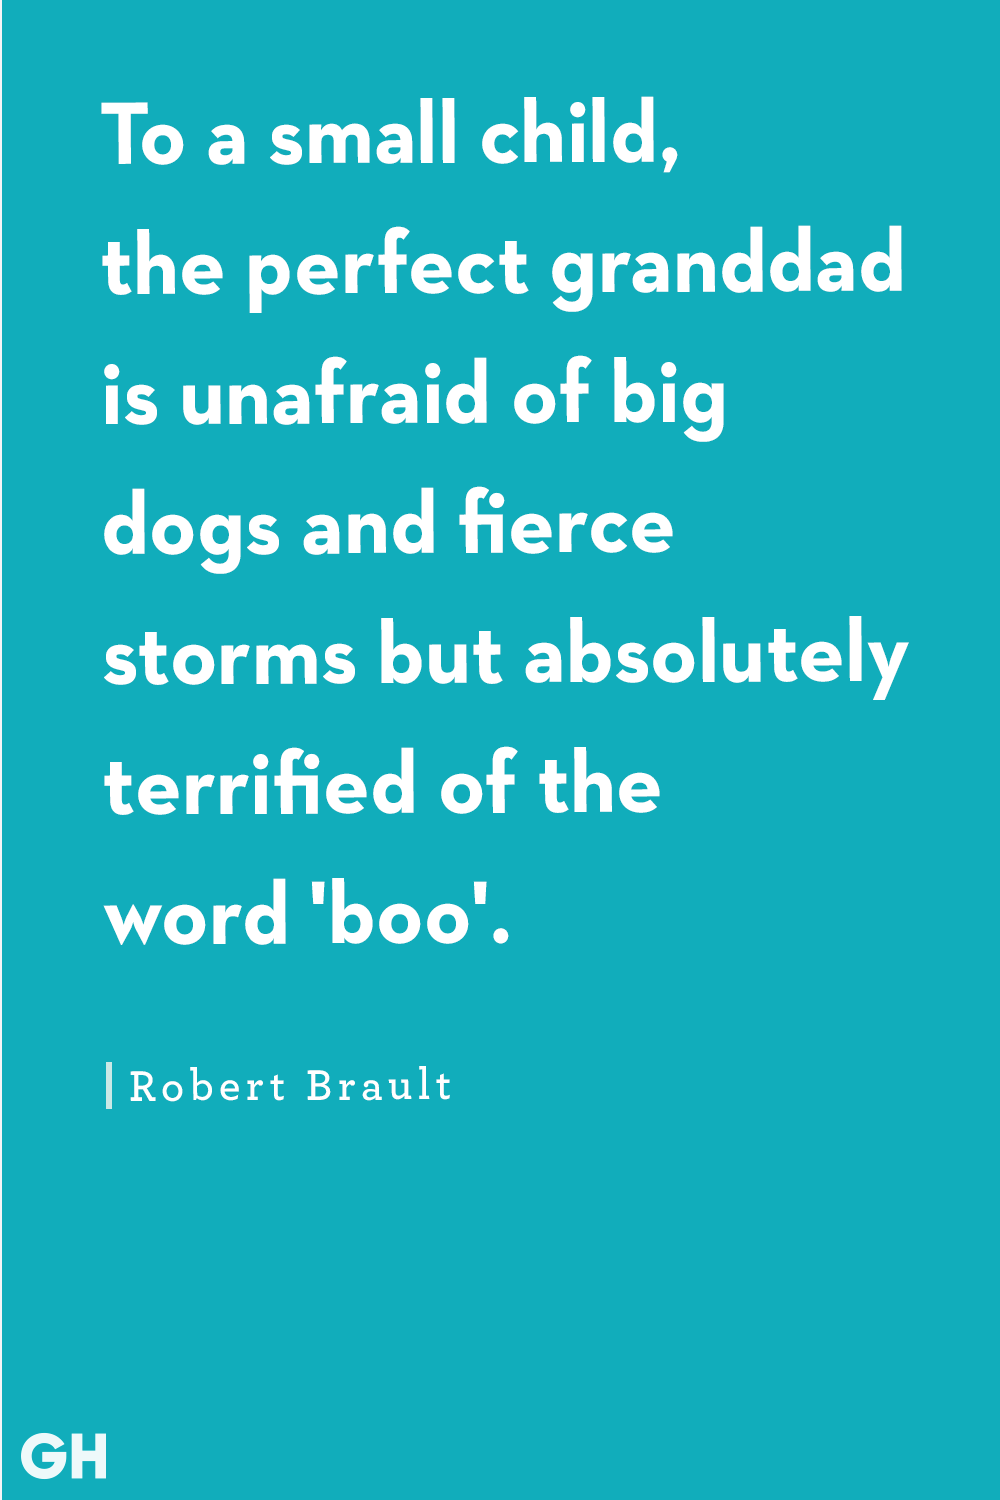 Best Grandpa Quotes Sayings And Quotes About Grandfathers